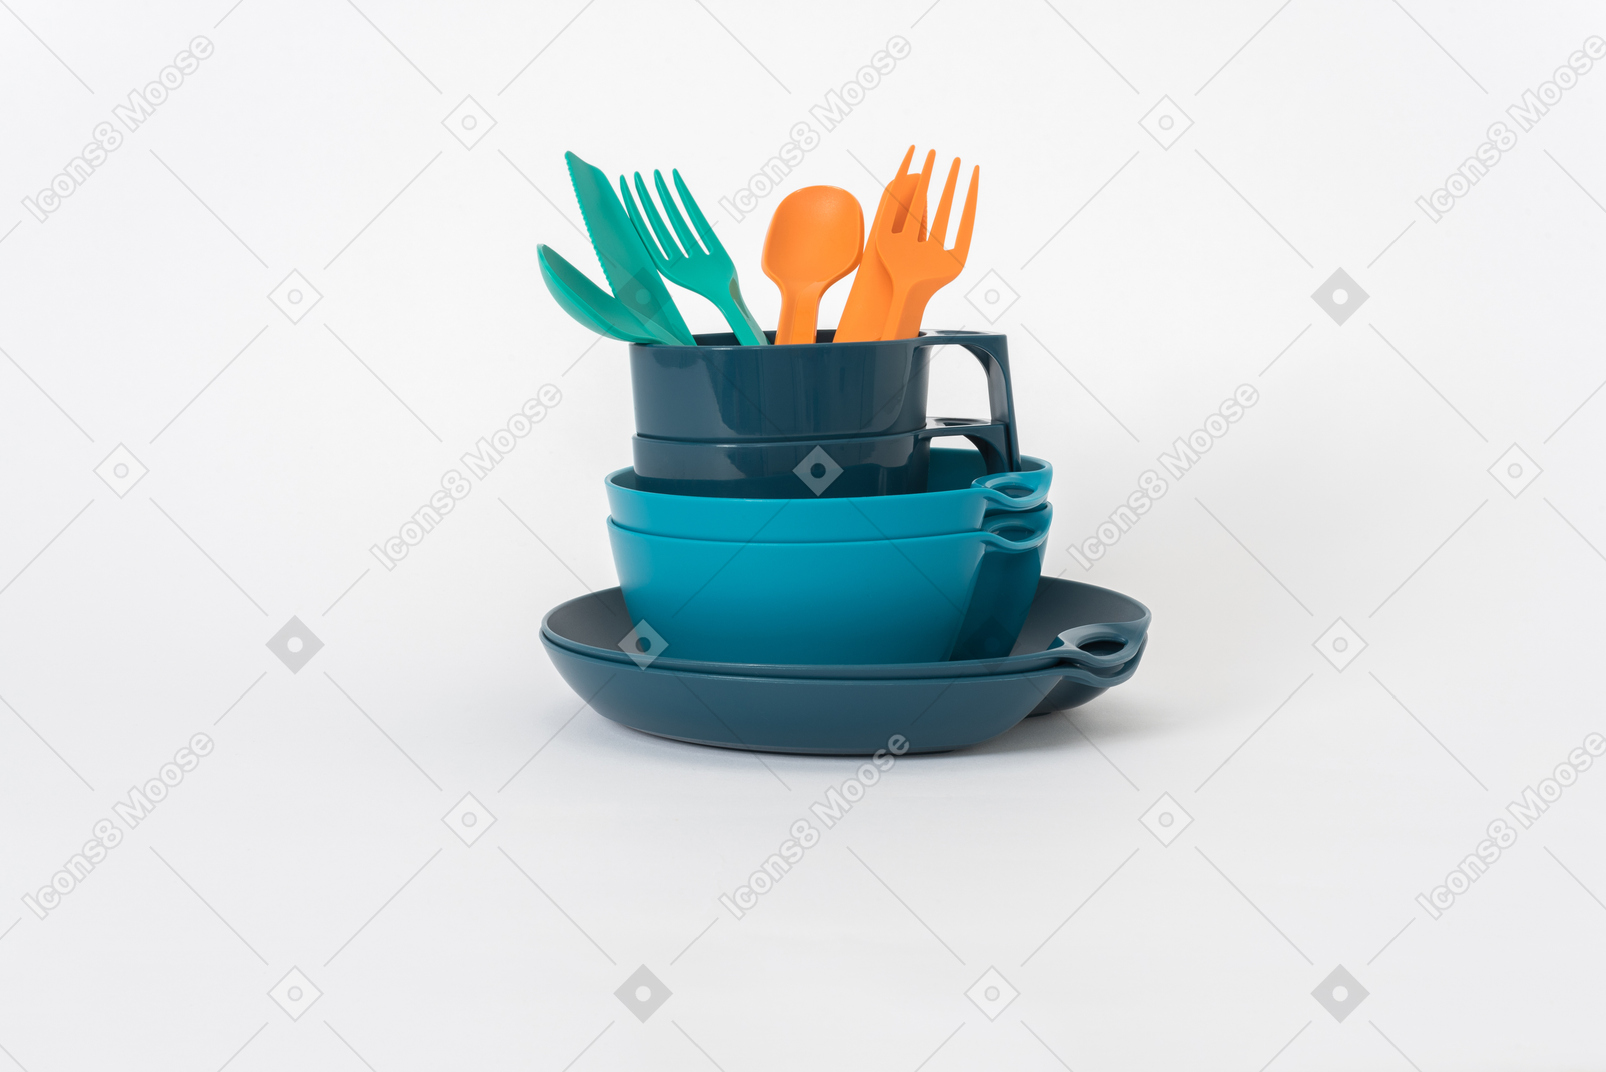 Stack of plastic tableware on a white background